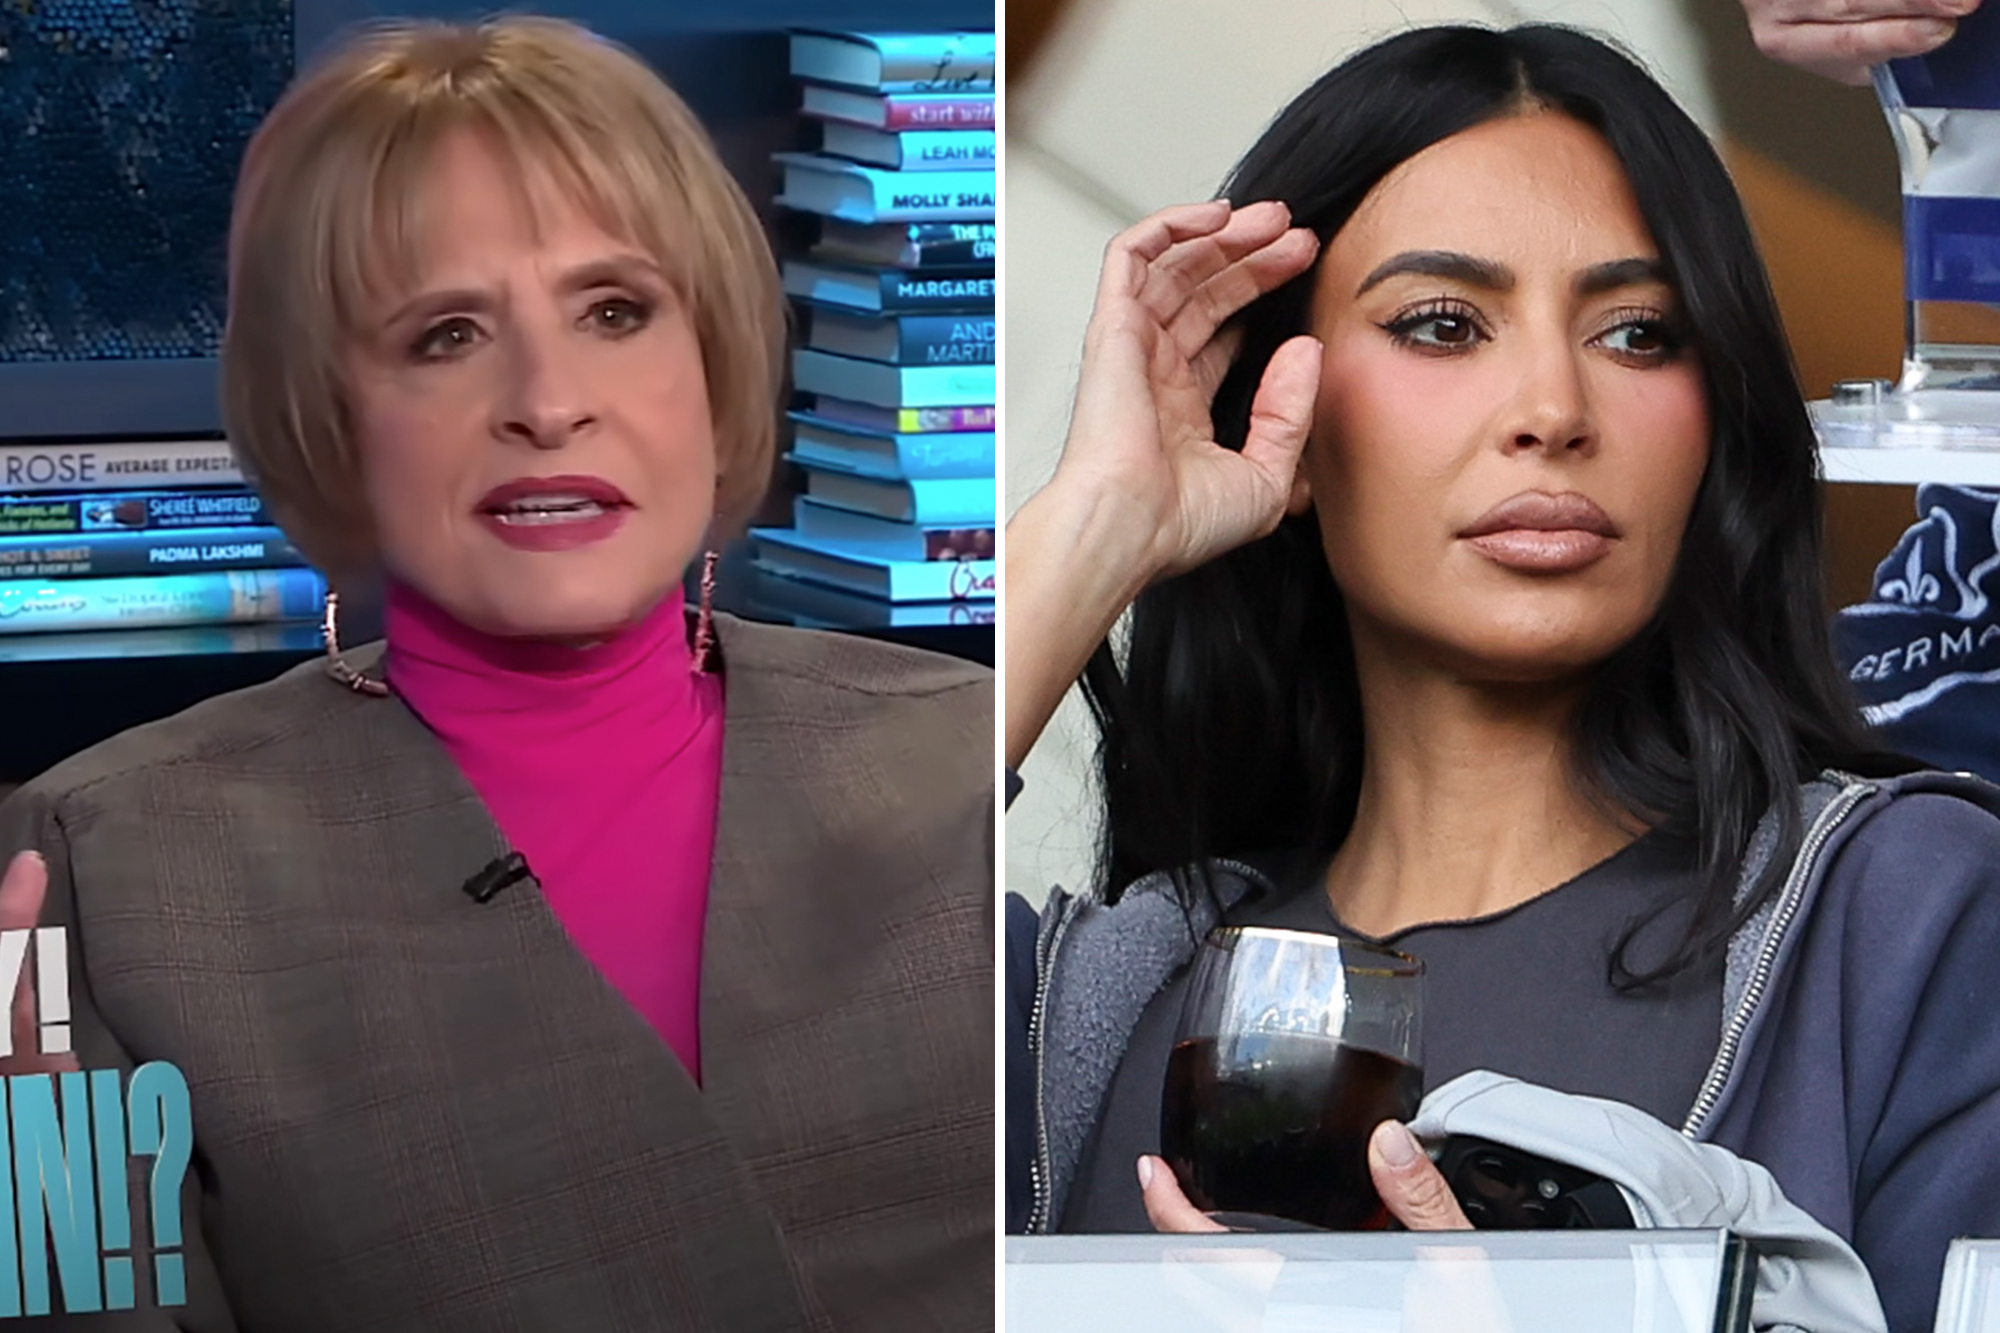 Broadway Star, Patti Lupone Belives Kim Kardashian being casted in 'American Horror Story' season 12 is taking the role away from full-time actors